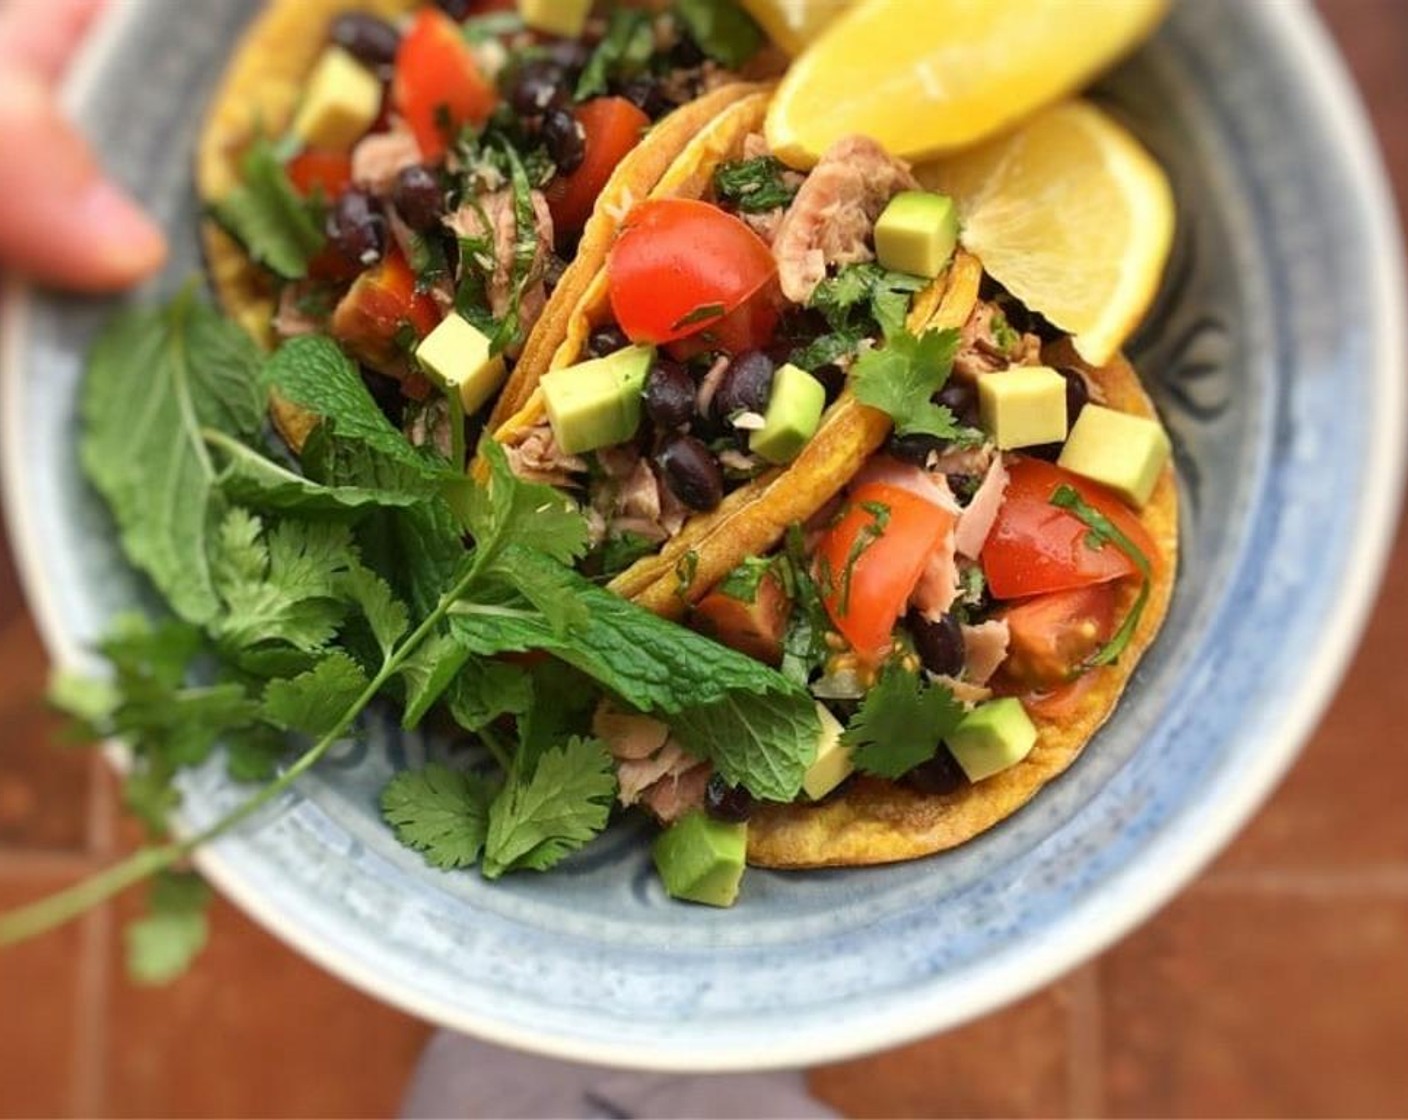 step 10 Place the tacos aside and prepare the rest. Serve the tacos with the tuna salad, the tomato salad and Avocado (1/2). Enjoy!